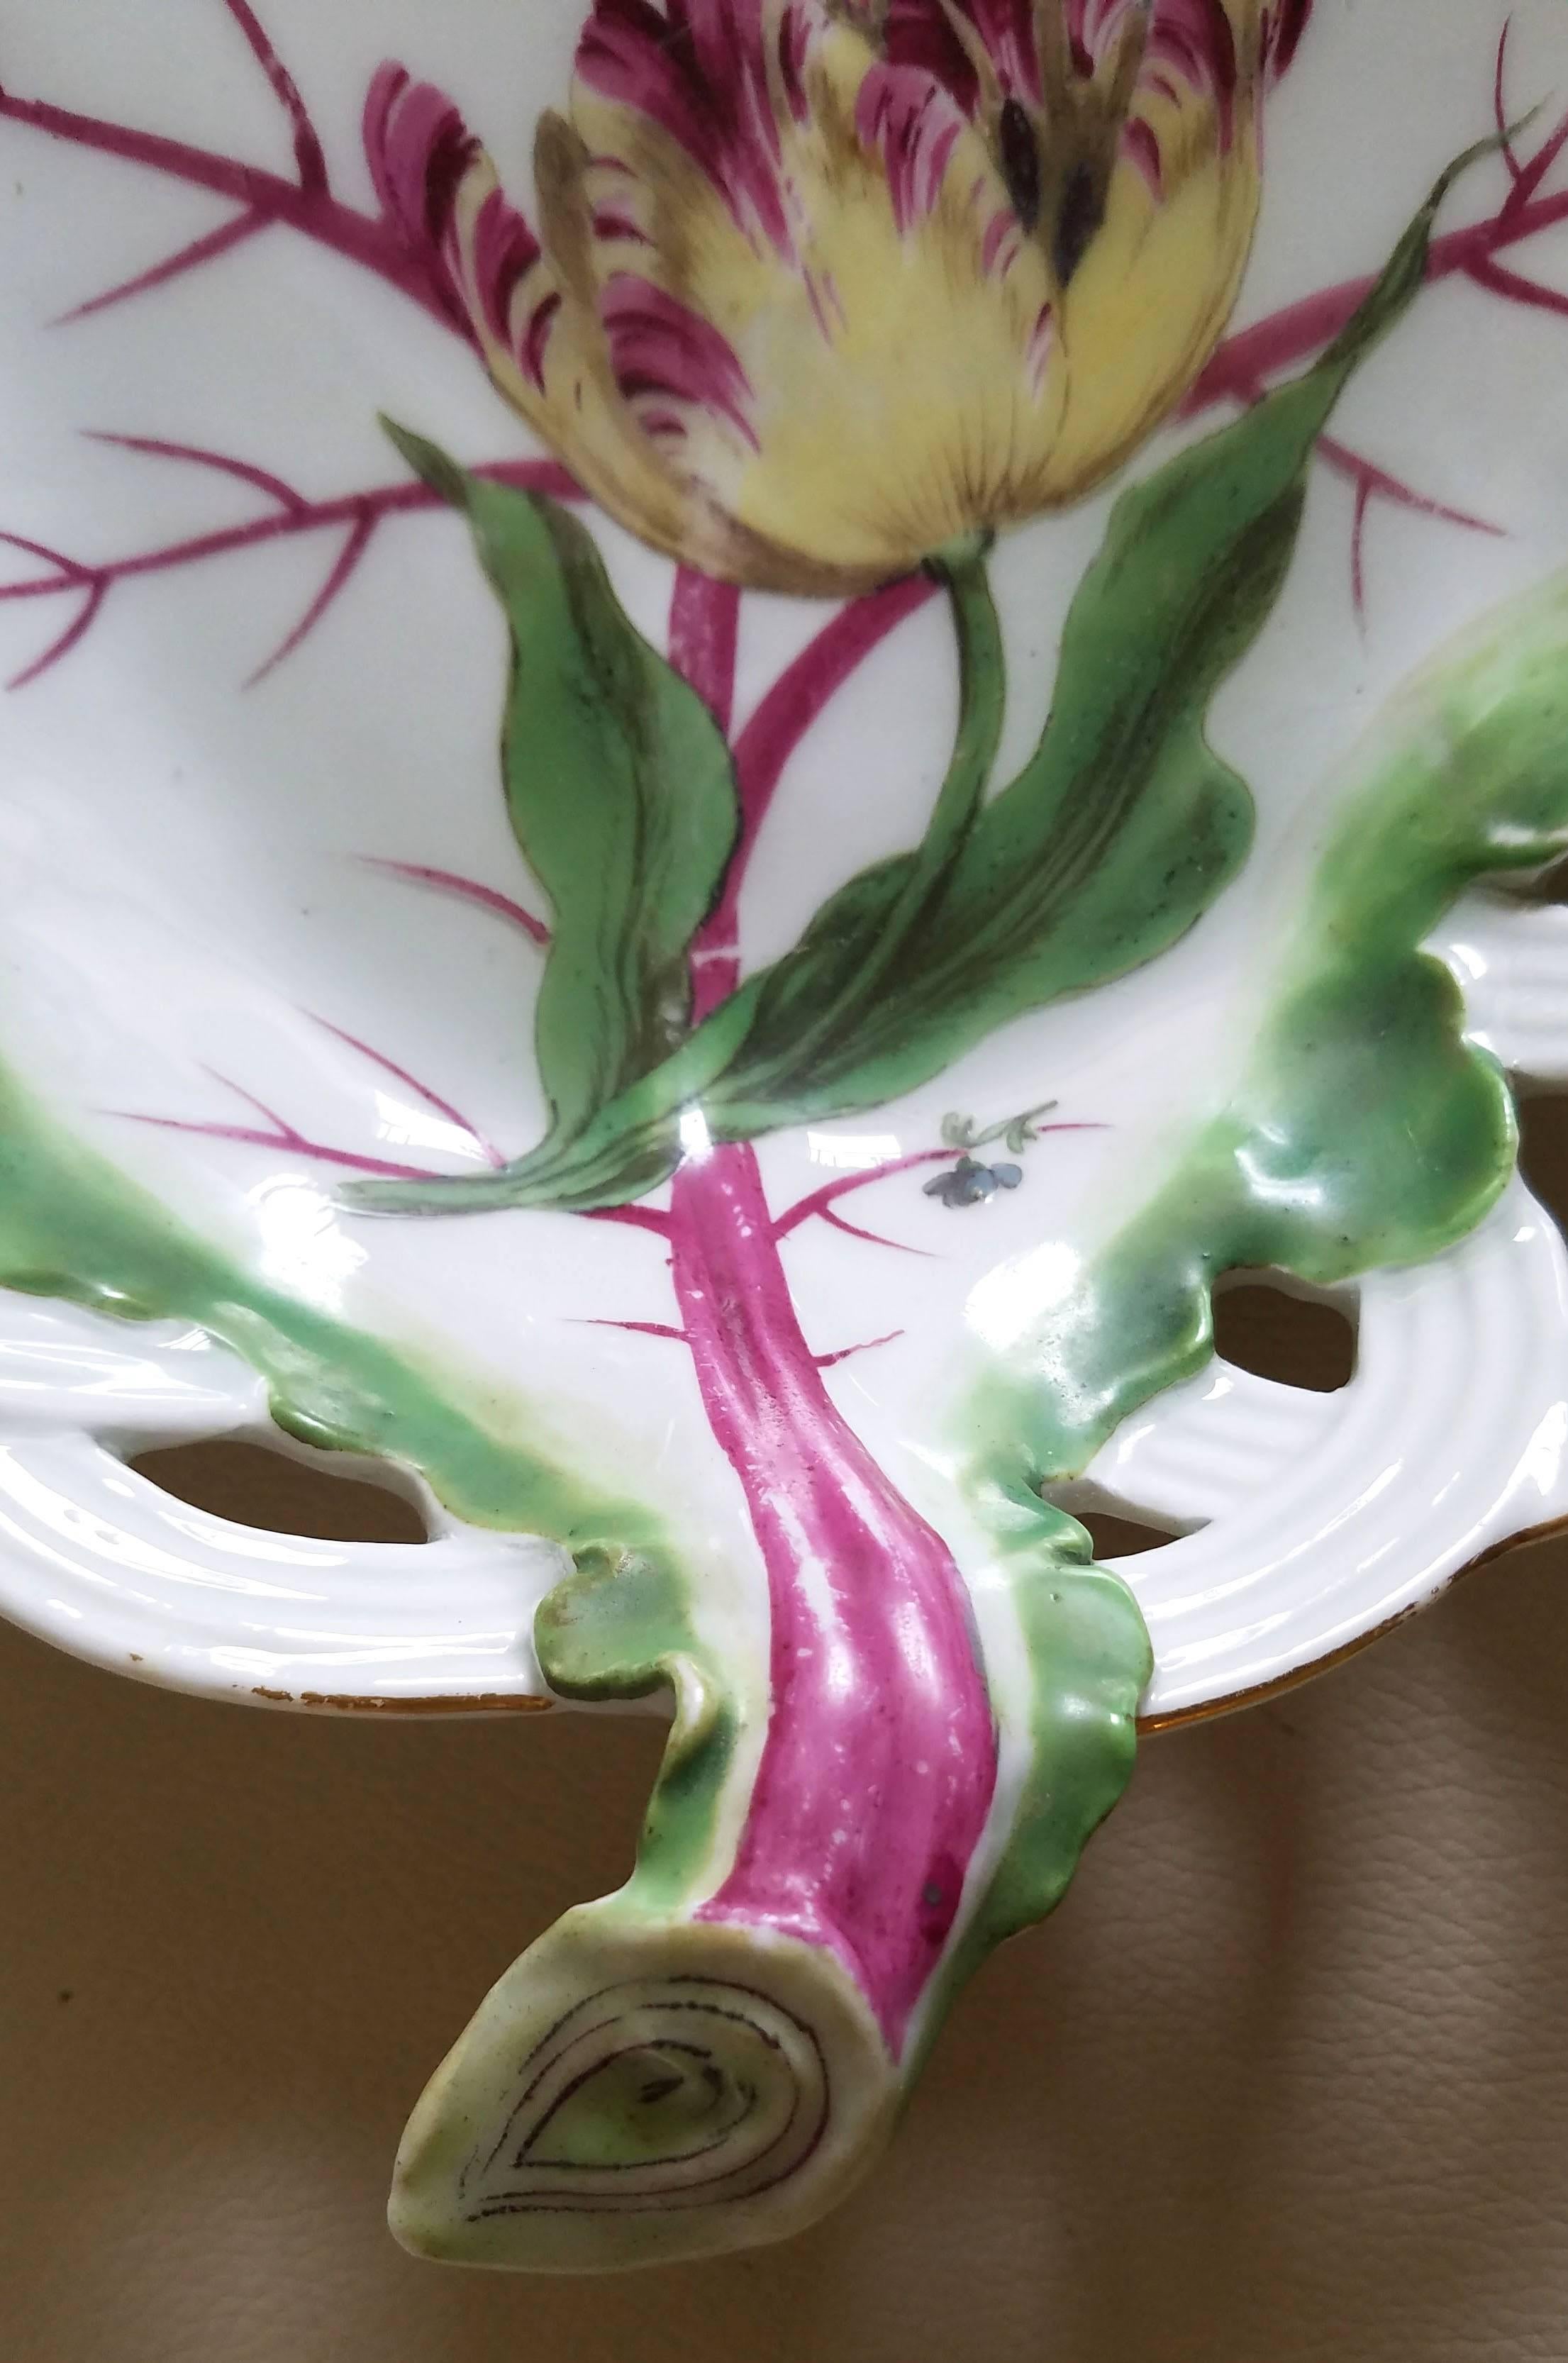 Chelsea porcelain pair of tromp l'oeil leaf dishes with tulips,
circa 1765-1770.

The pair of tromp l'oeil porcelain Chelsea Porcelain dishes each depict a large green leaf with purple veining lying on an openwork basket and each painted with a